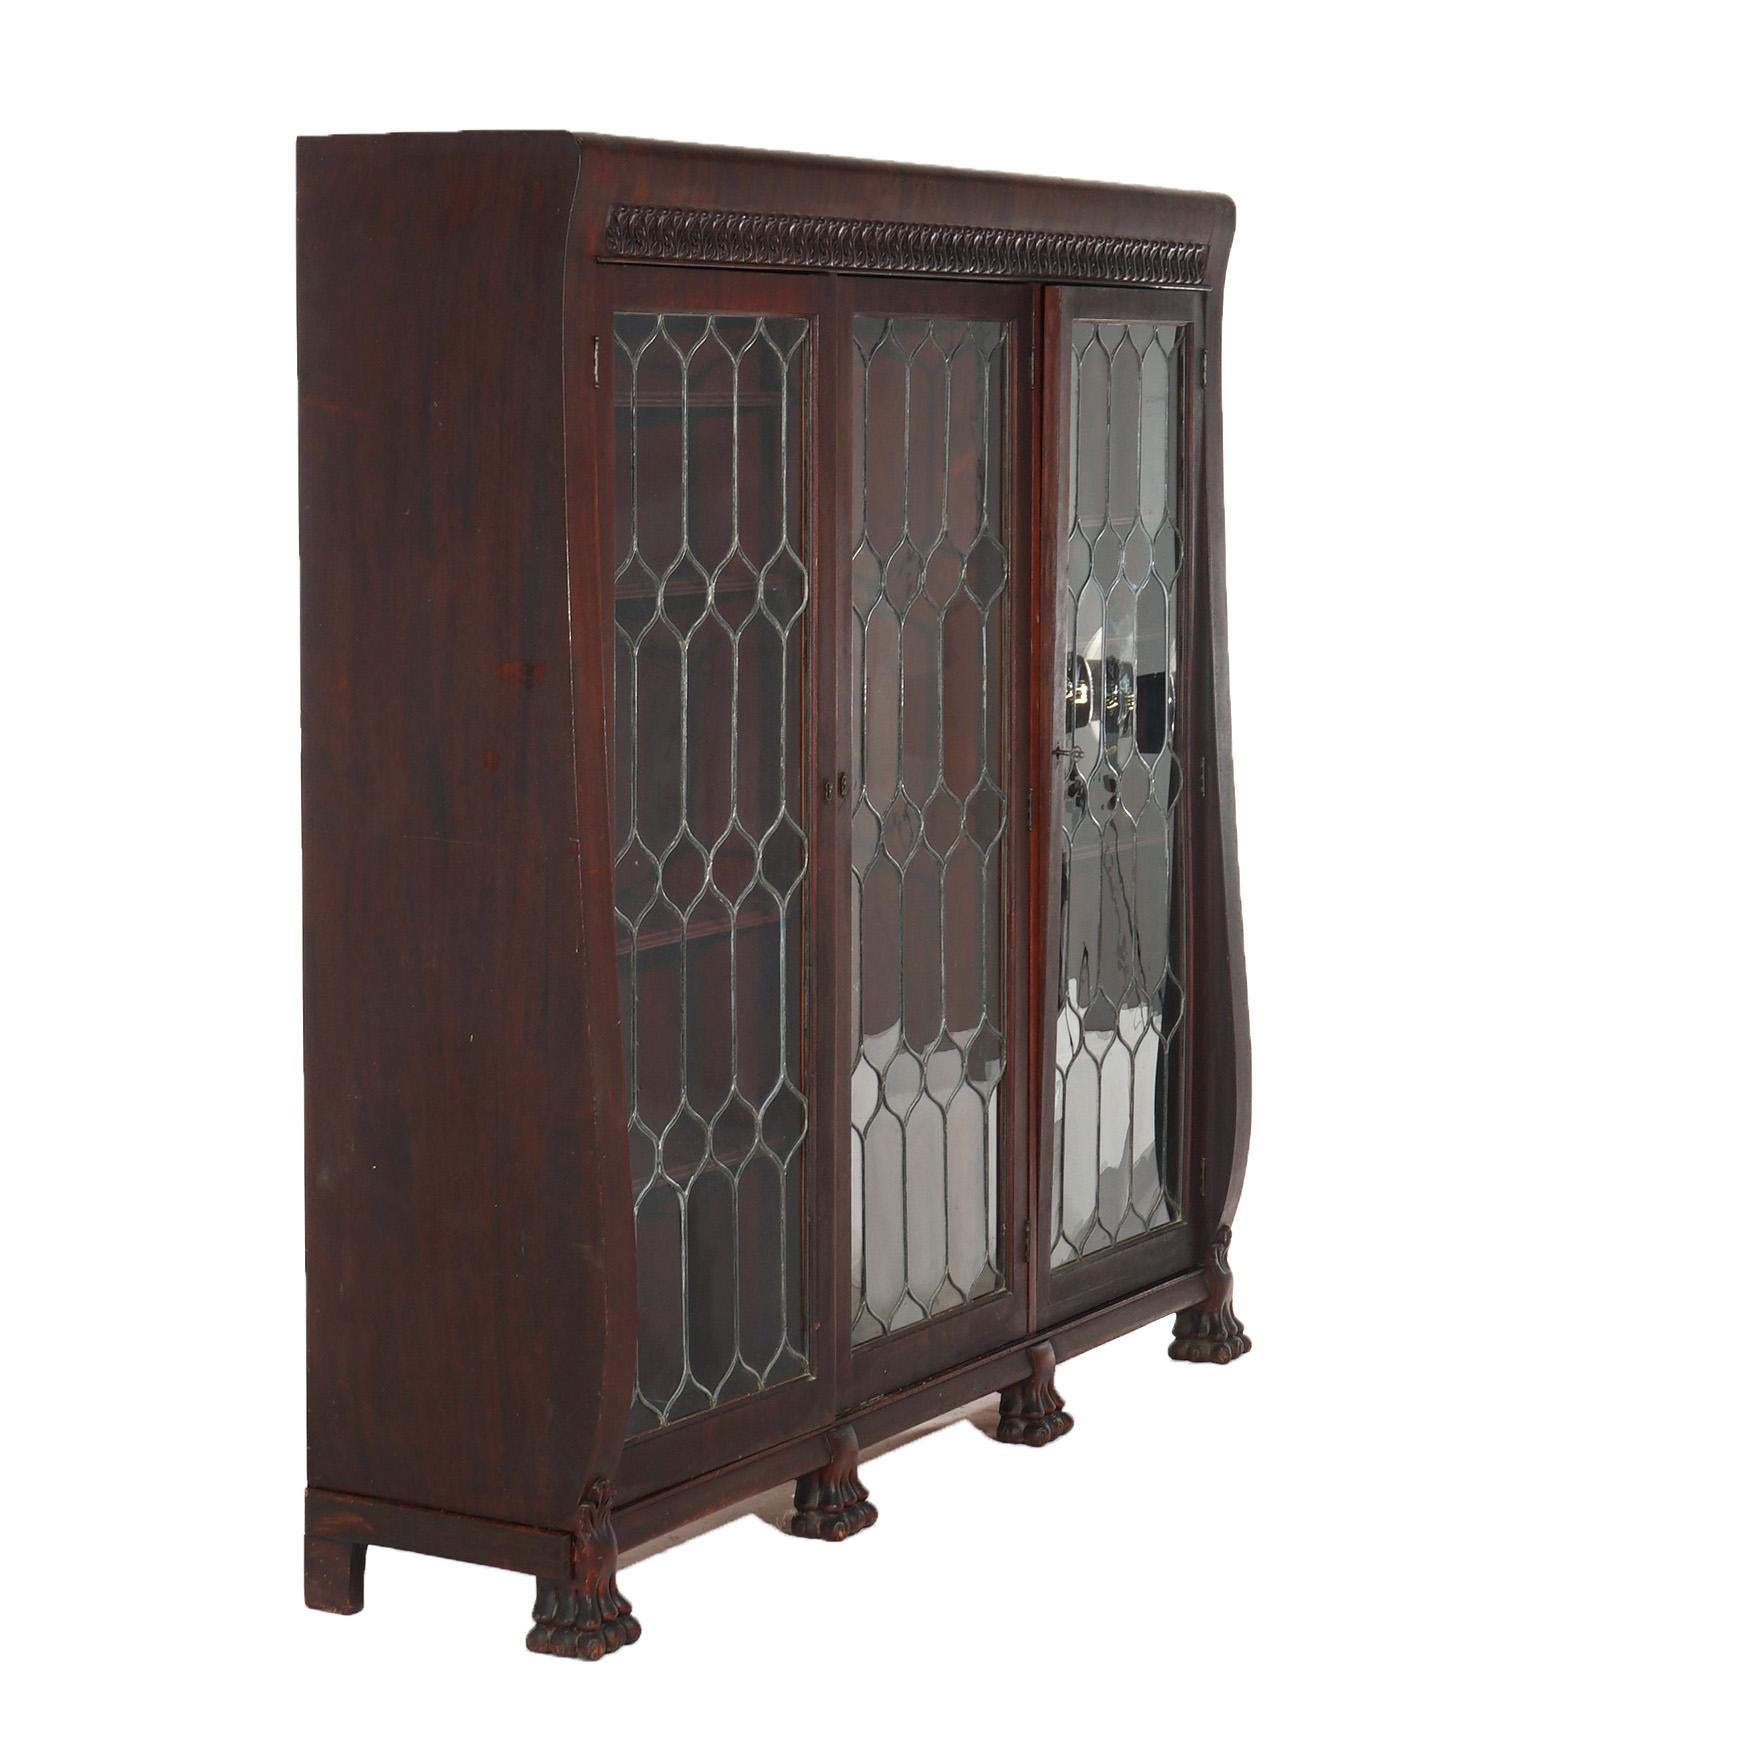 20th Century Antique Mahogany Triple Door Leaded Glass Bookcase with Carved Claw Feet C1900 For Sale